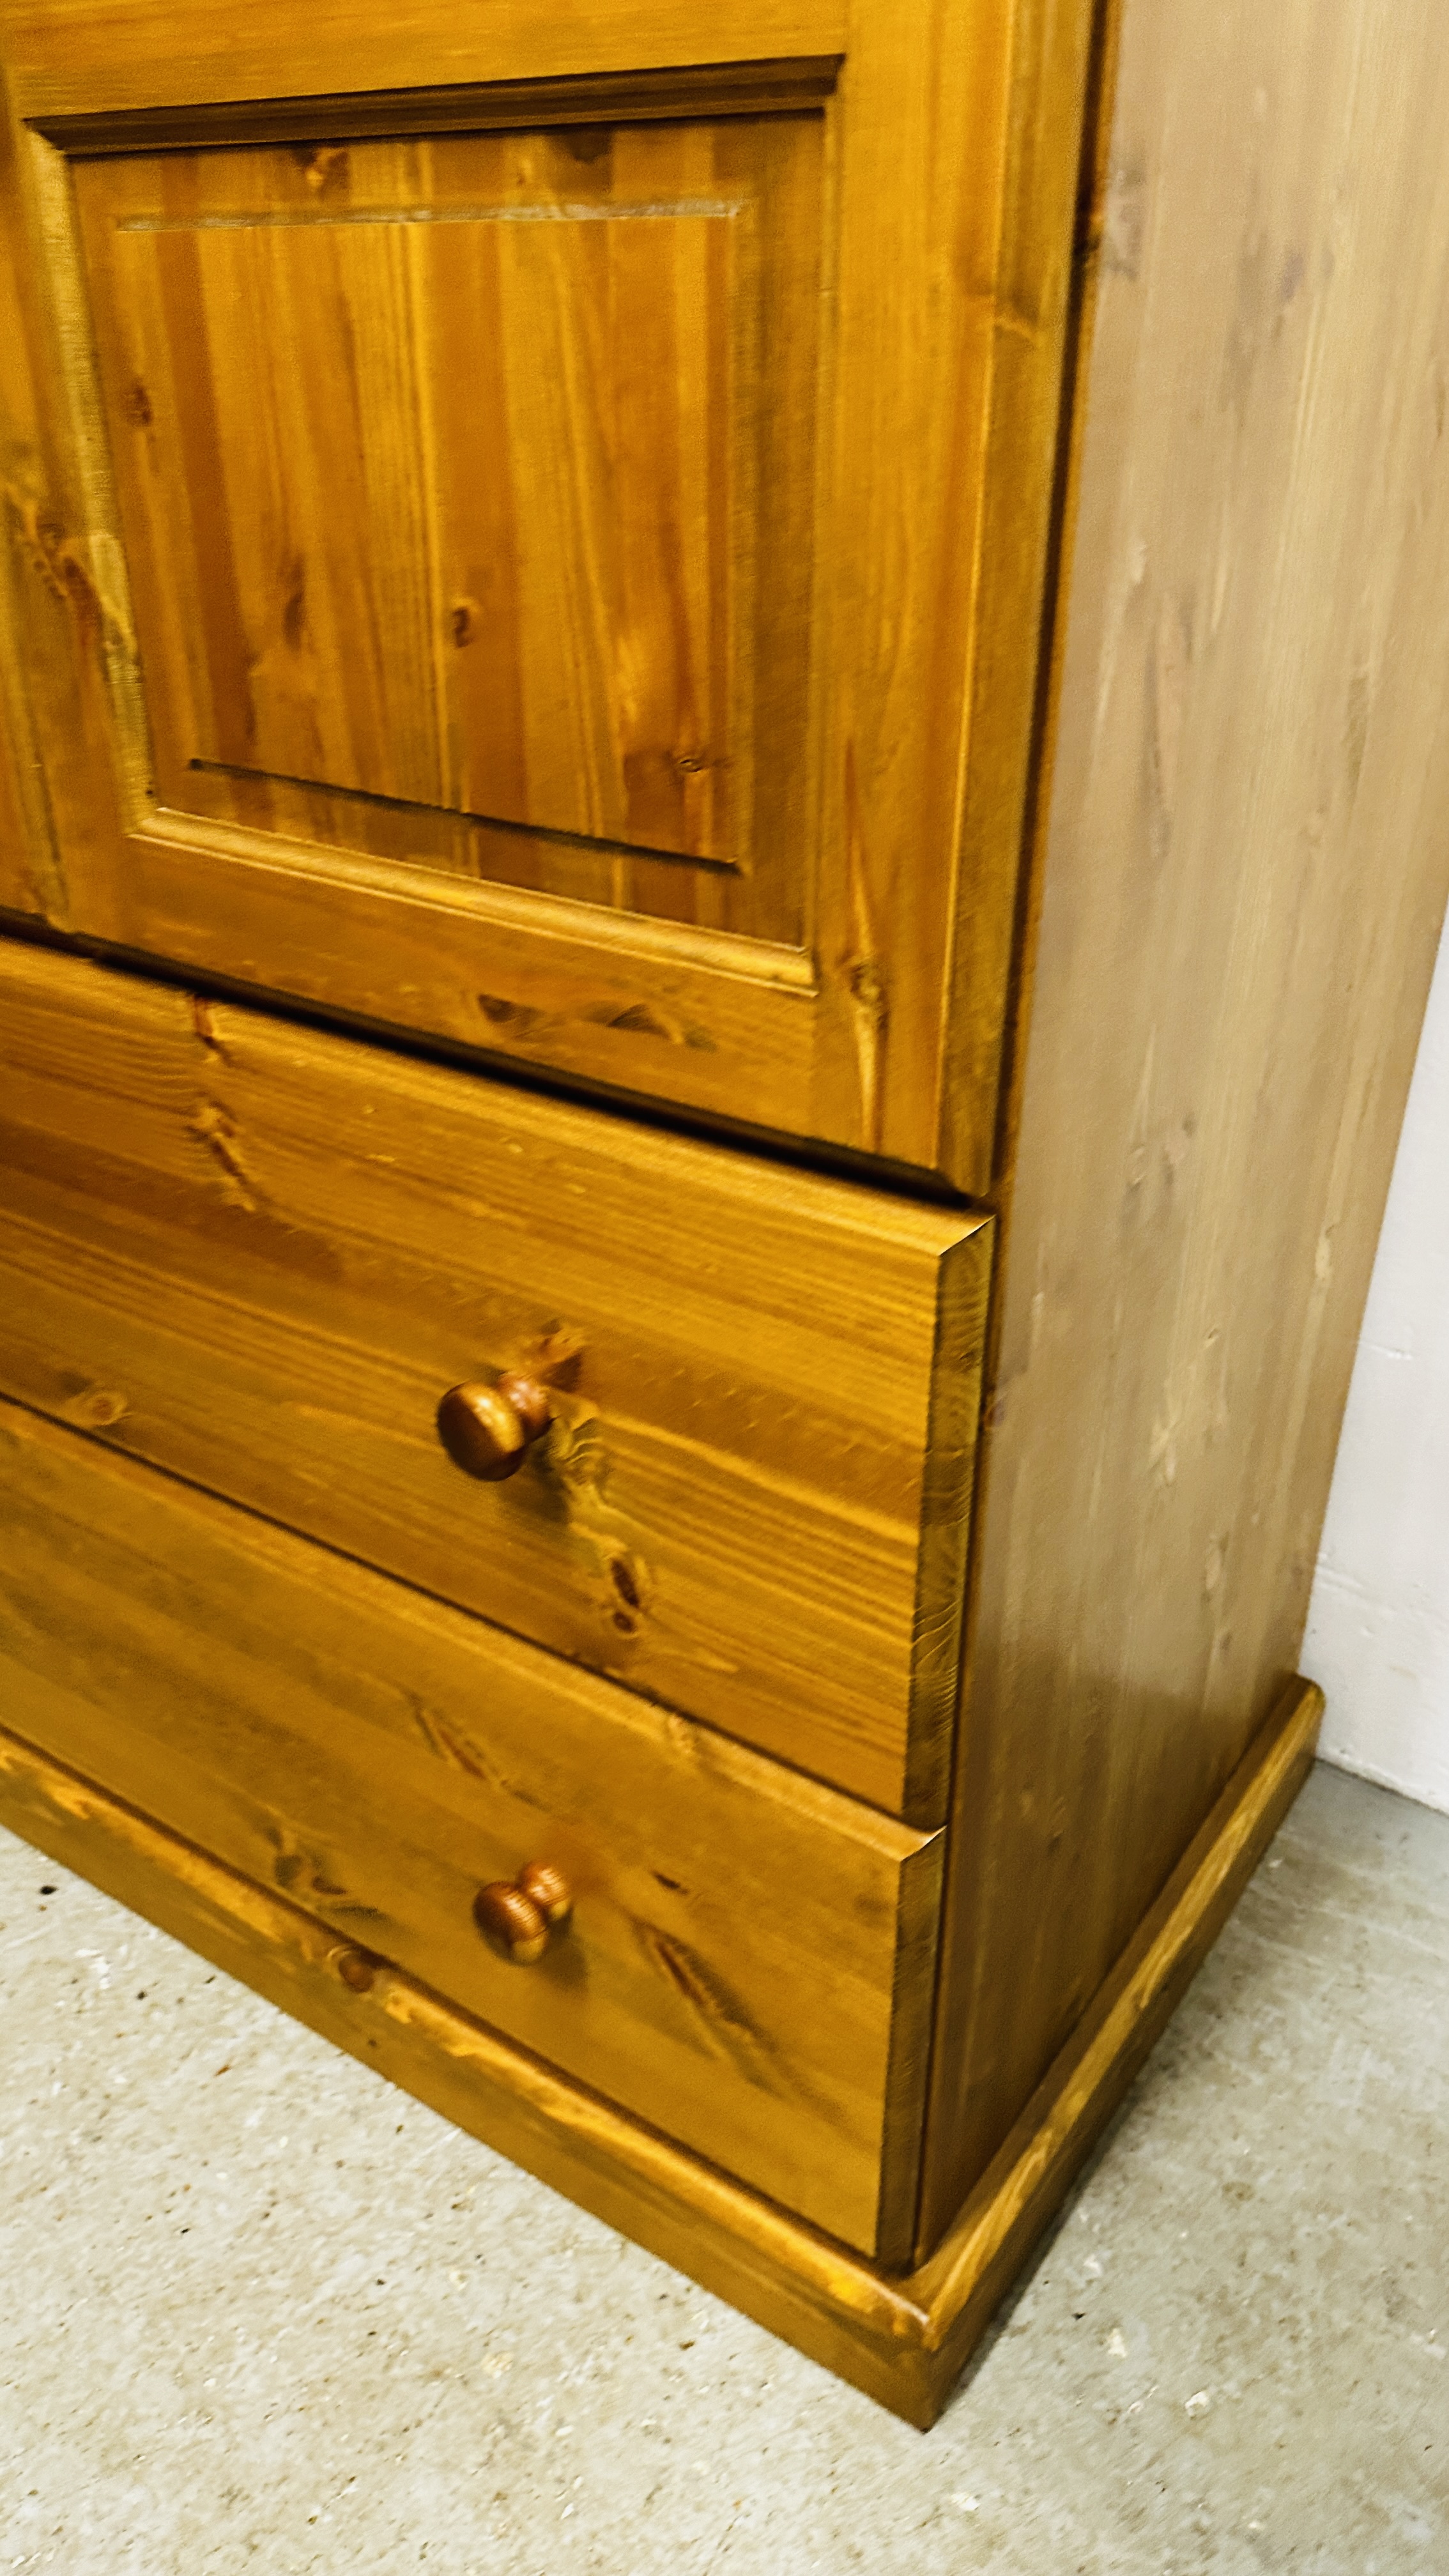 A SOLID PINE TWO DRAWER DOUBLE WARDROBE, W 90CM X D 53CM X H 179CM. - Image 6 of 8